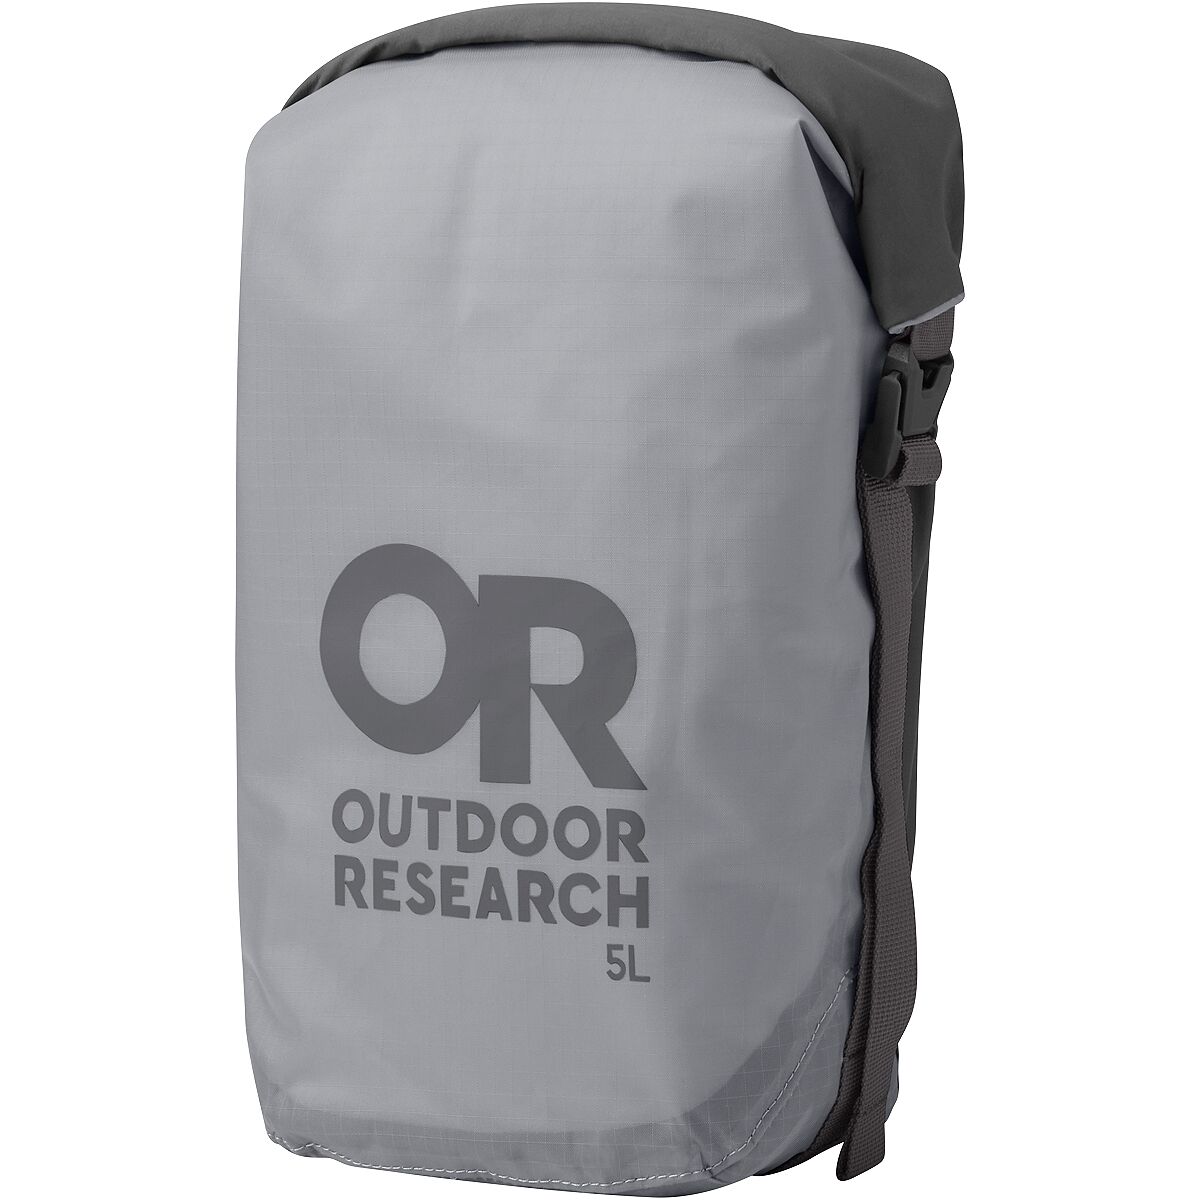 Outdoor Research CarryOut Airpurge Compression 5L Dry Bag